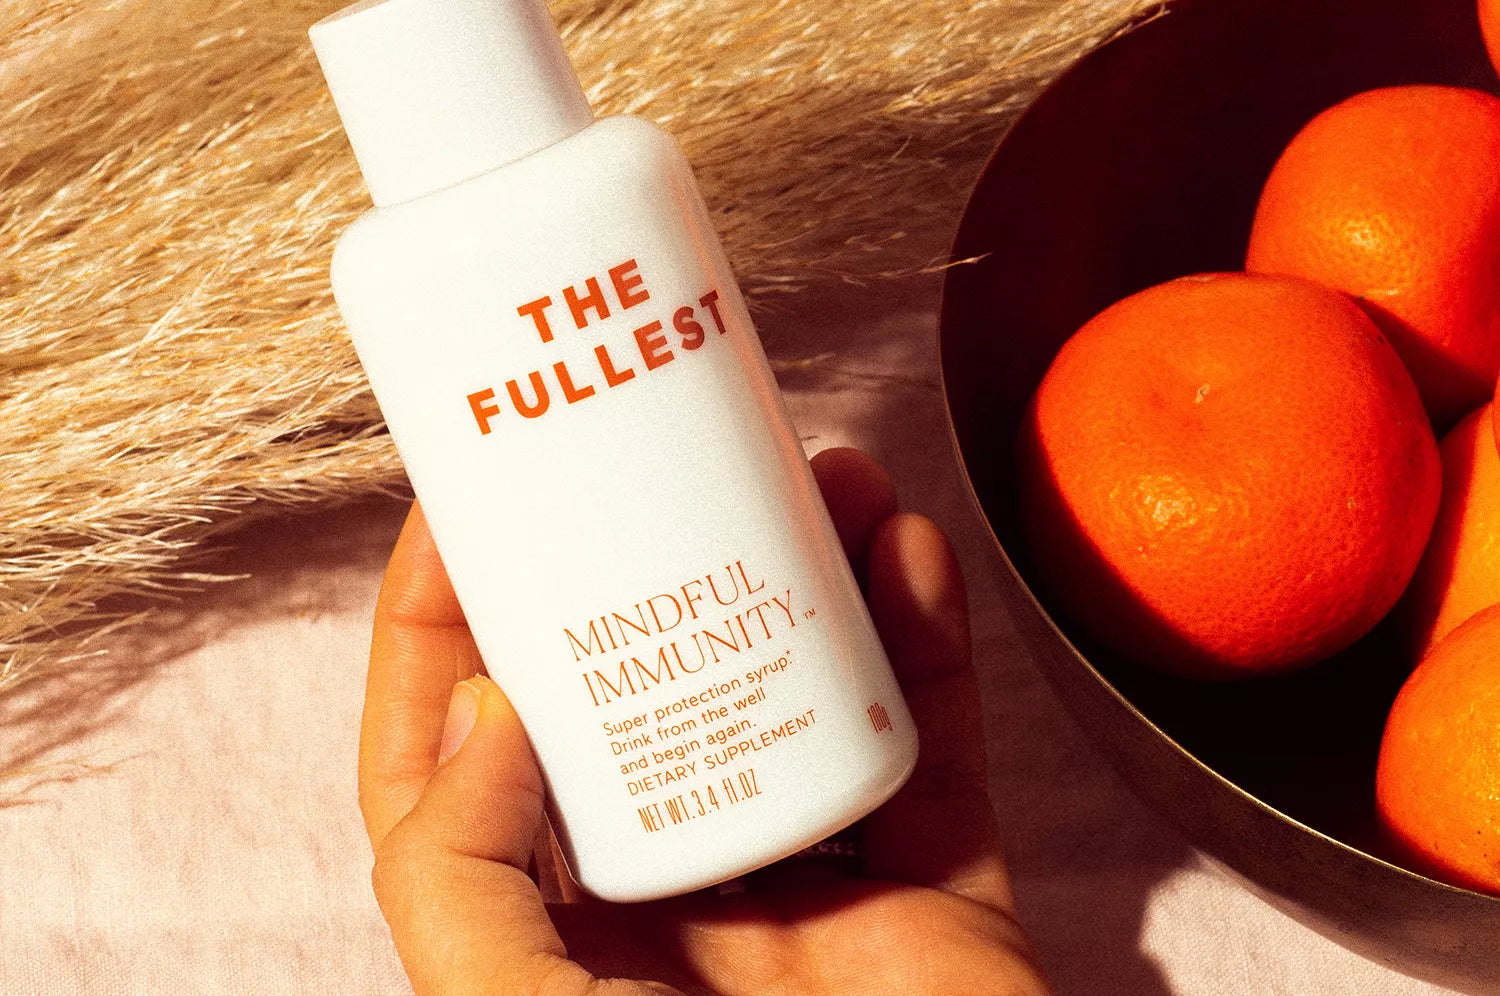 The Fullest Mindful Immunity™ – Super Protection Syrup